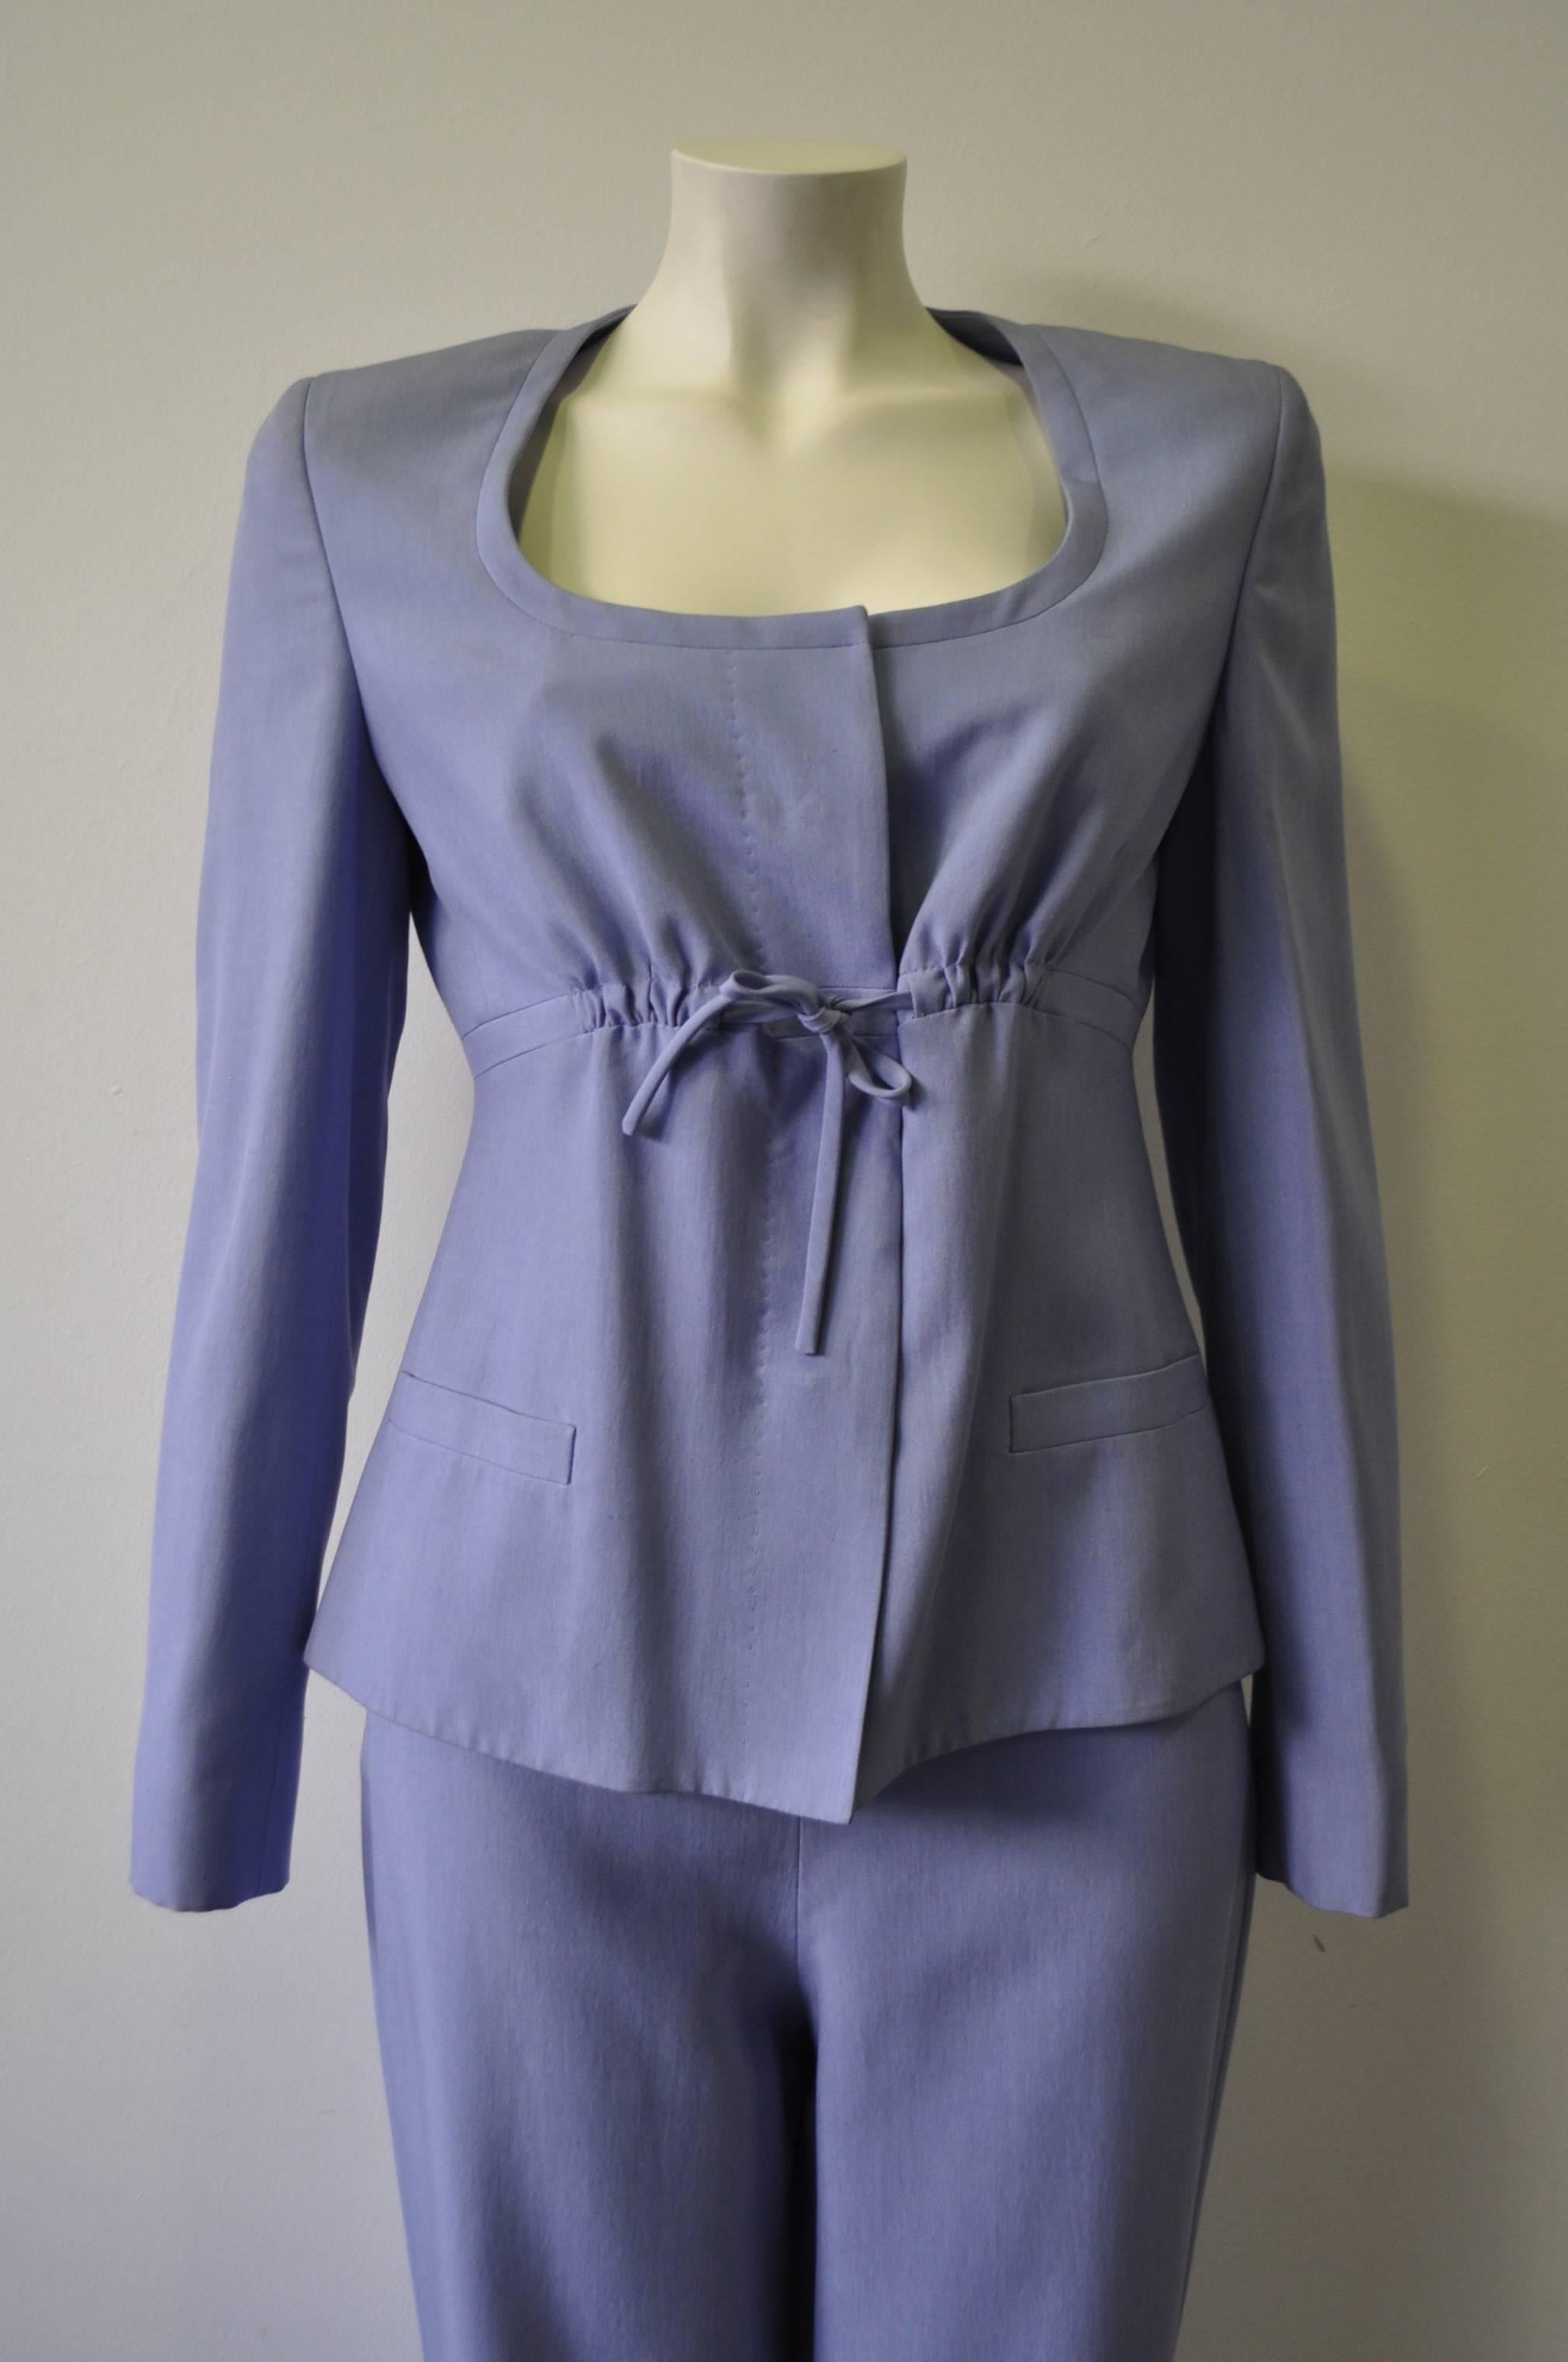 Gianni Versace Couture 100% Silk Drawstring Bust Jacket and Pants Suit